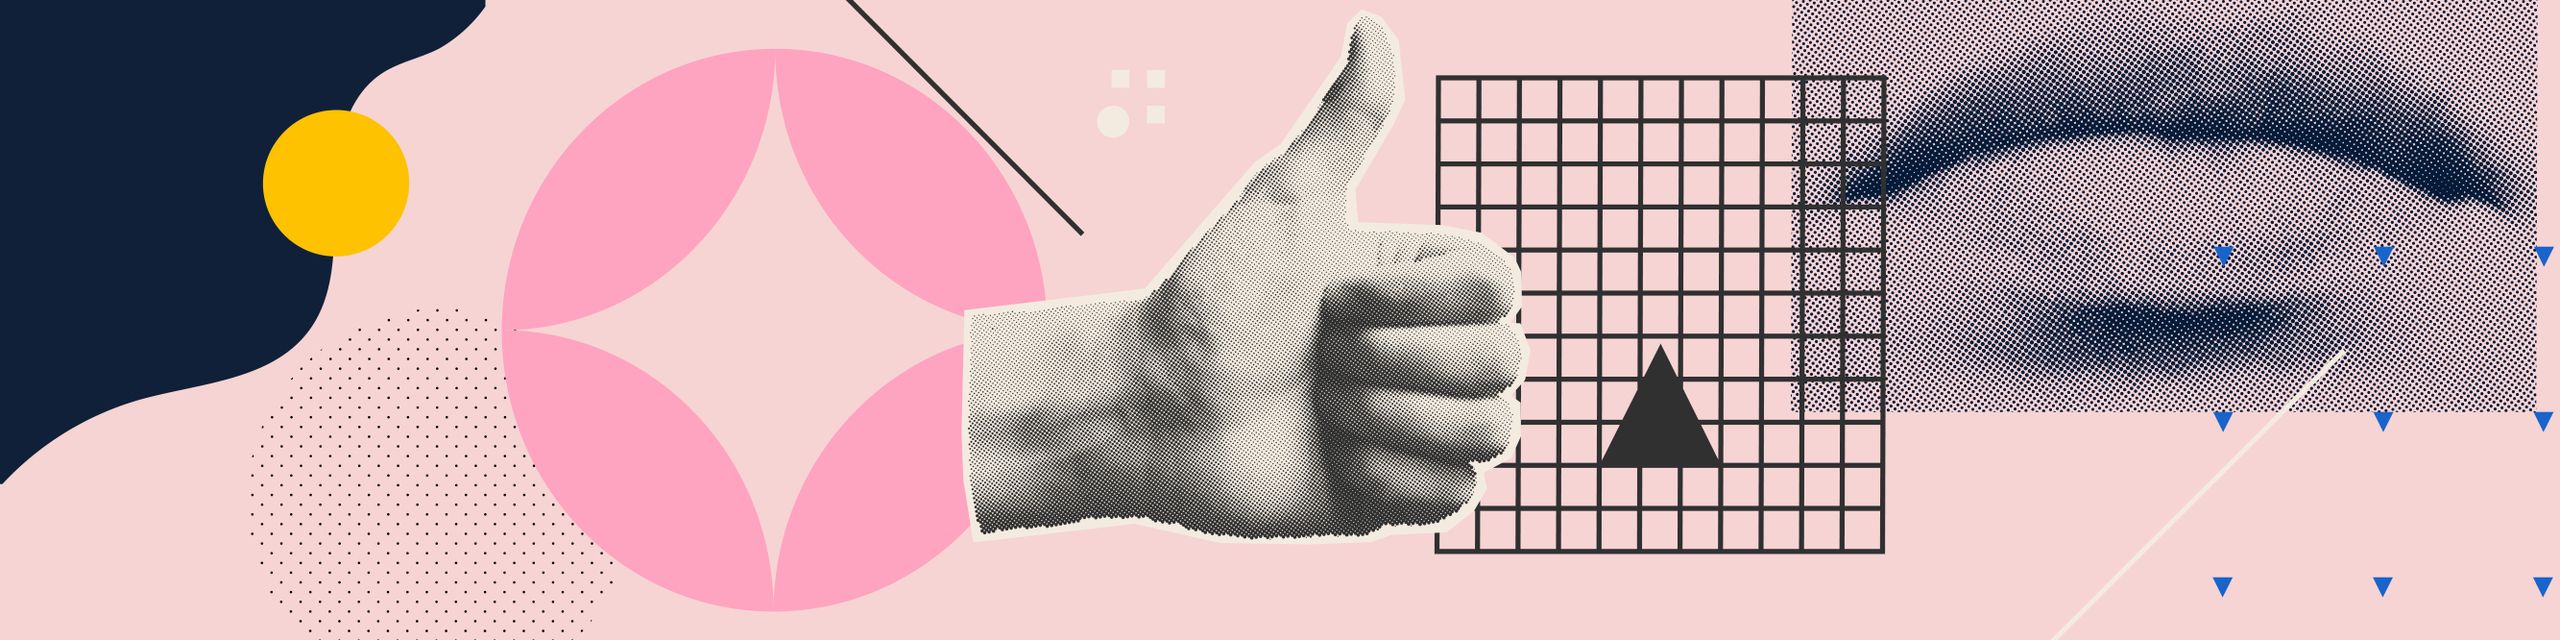 Thumb_pointing_up_with_shapes_behind_it_on_pink_background_hero_image.jpg